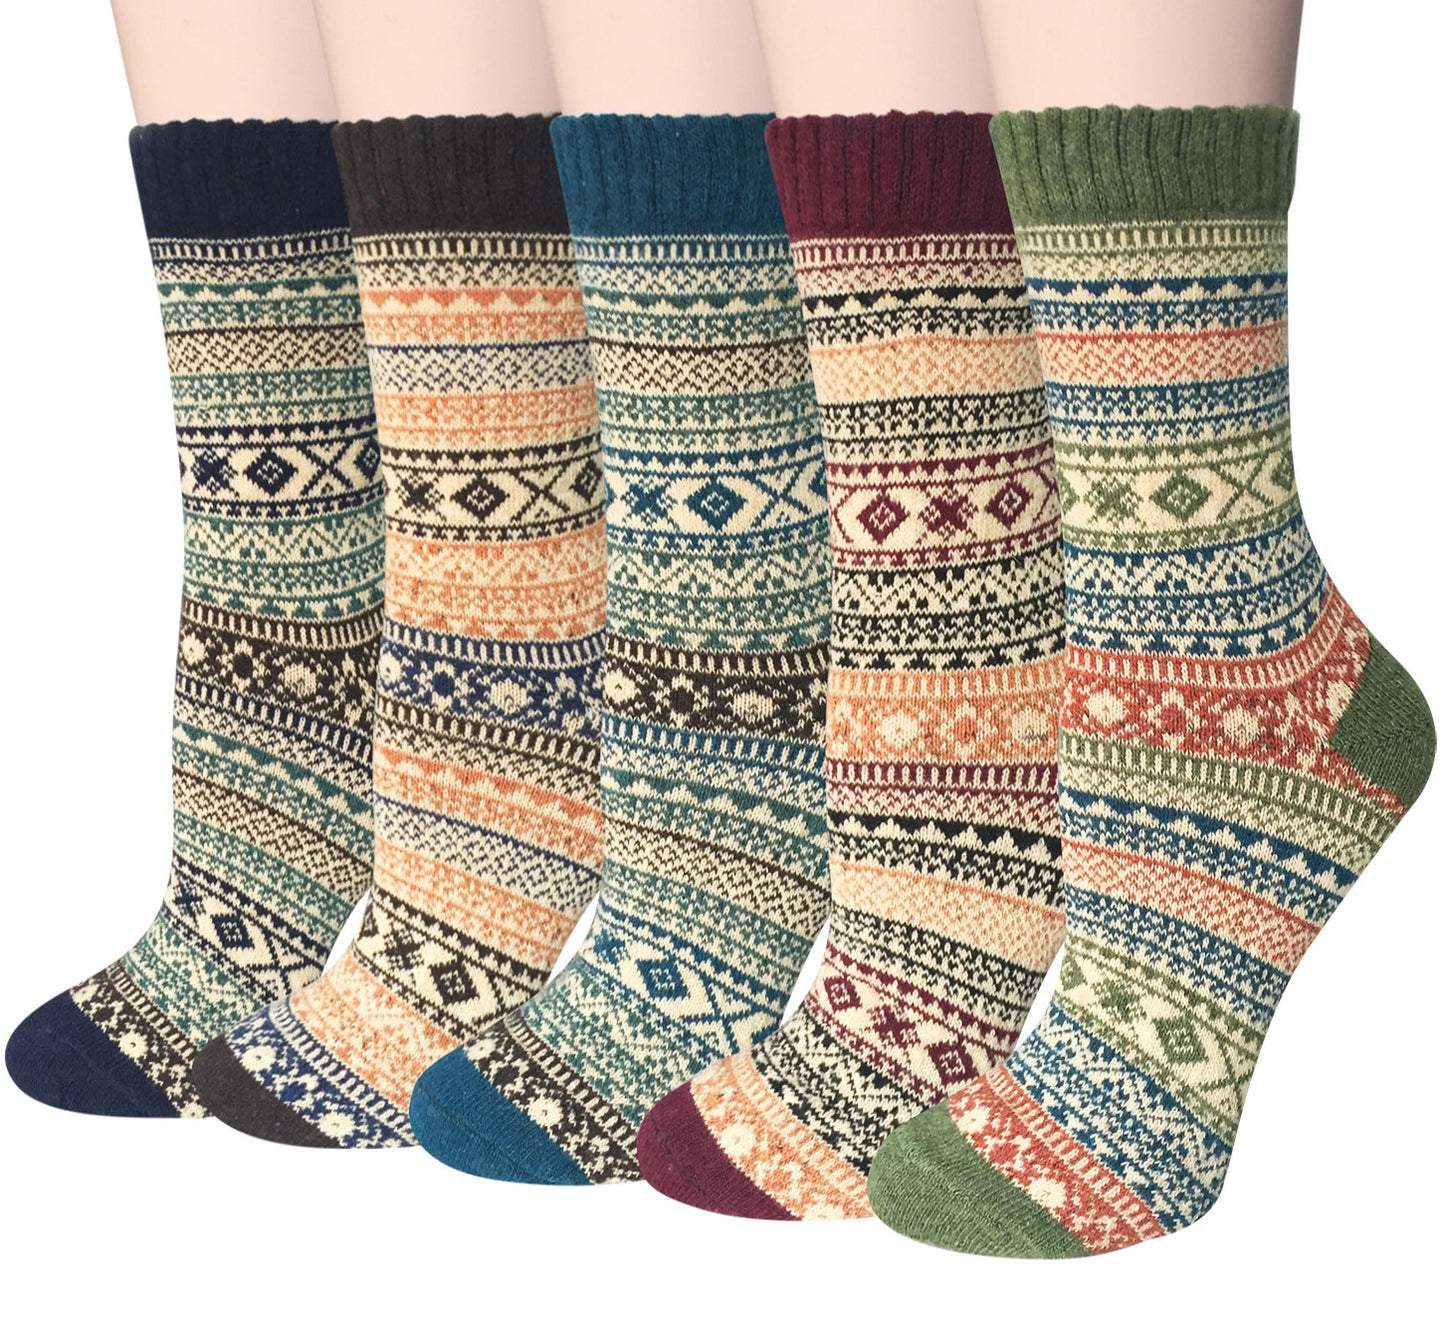 Pack of 5 Womens Winter Socks Warm Thick Knit Wool Soft Vintage Casual Crew Socks Gifts,C-nordic Style，Large